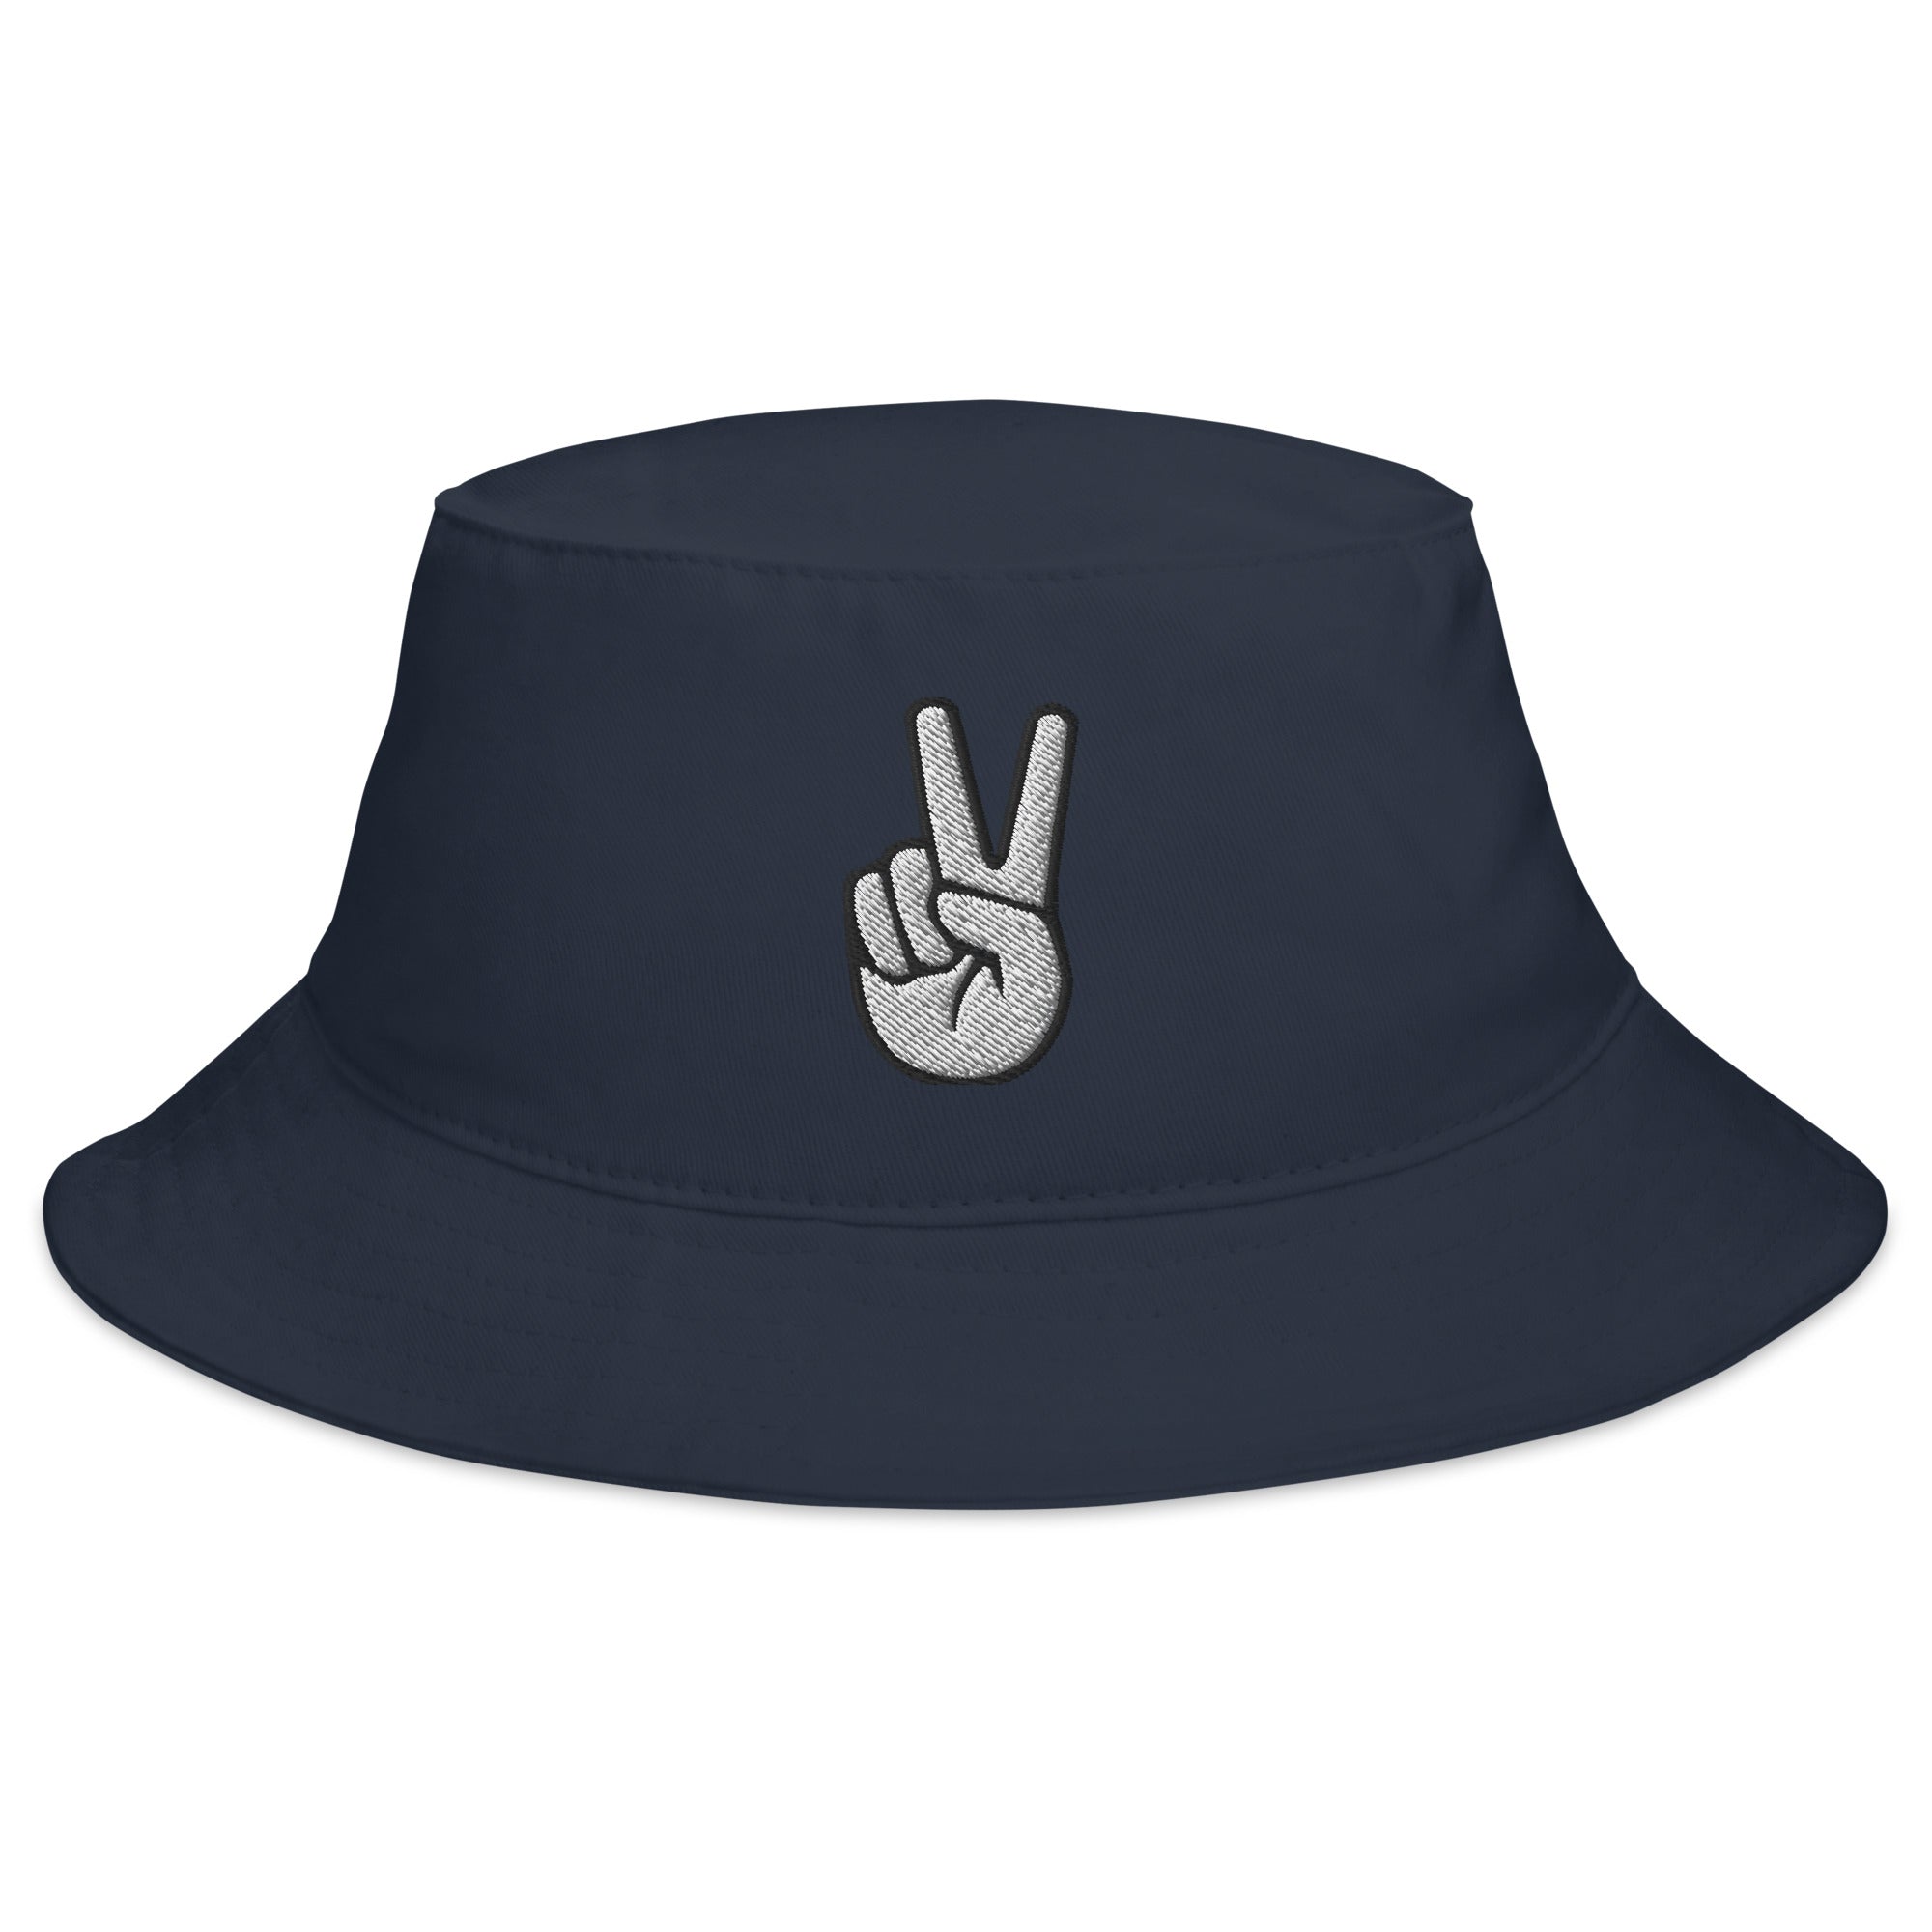 The V Sign for Victory Hand Gesture Embroidered Bucket Hat